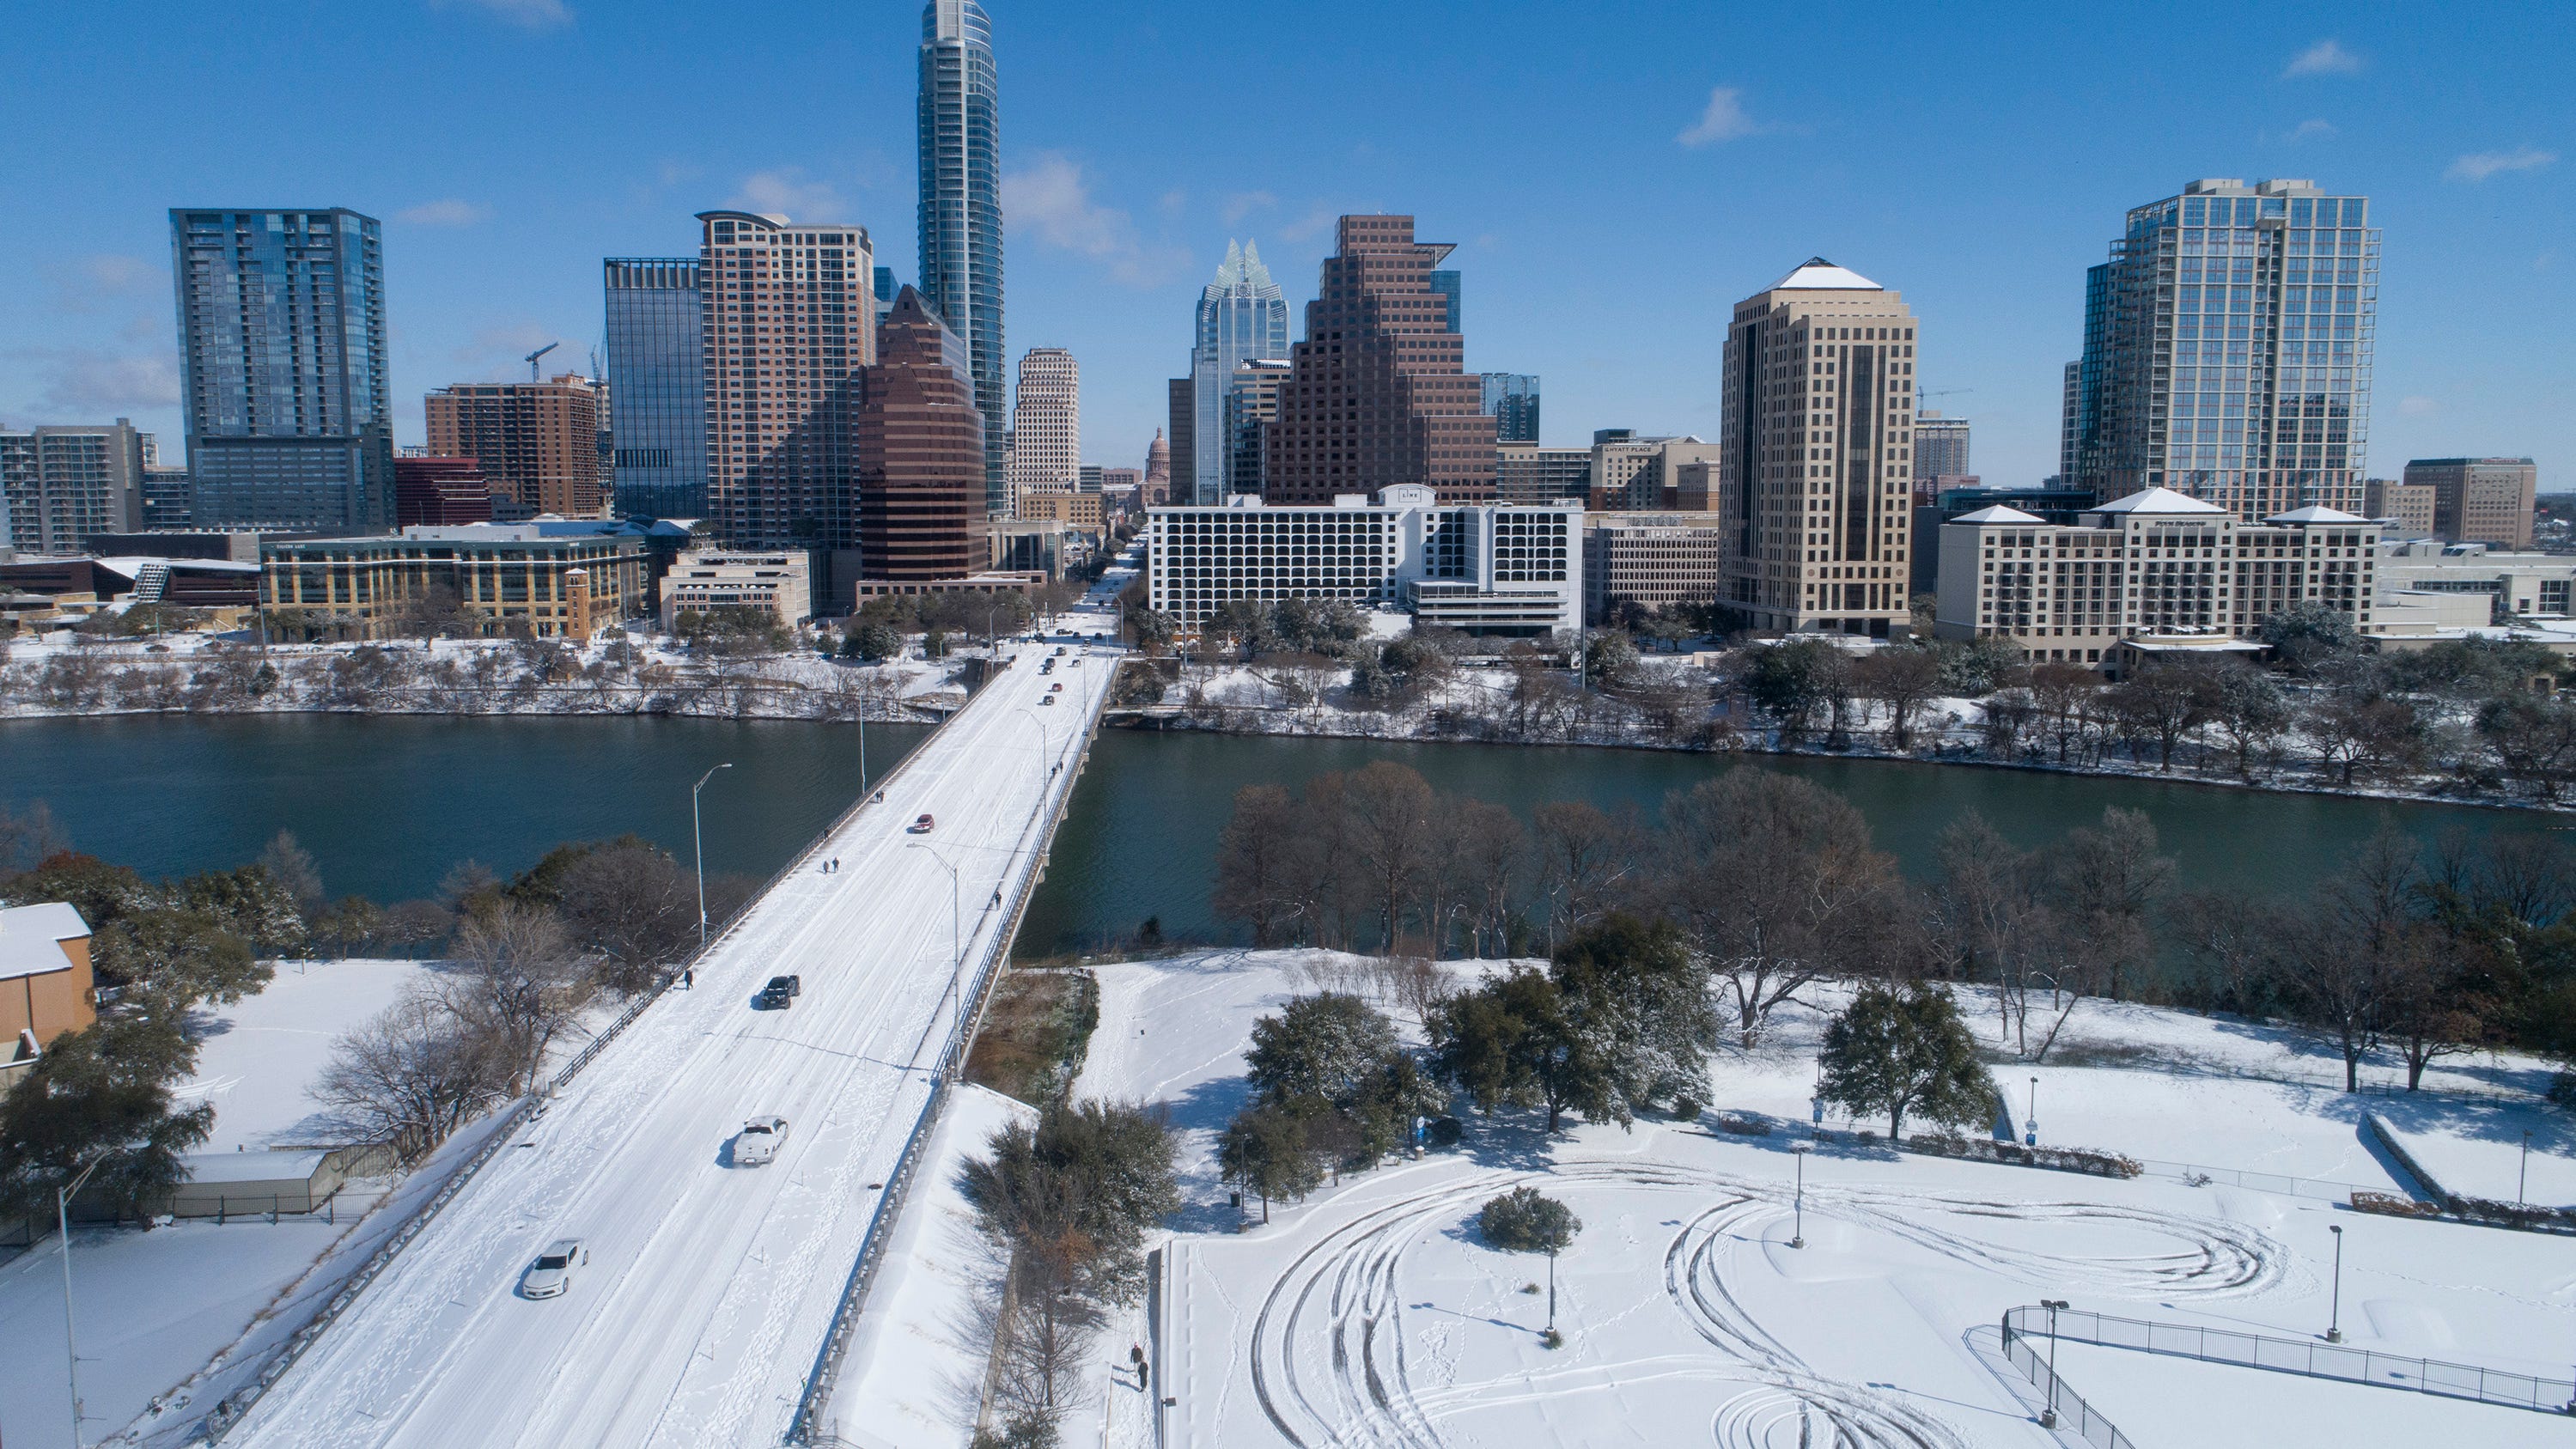 Austin weather in February was warm, then cold, then warm again